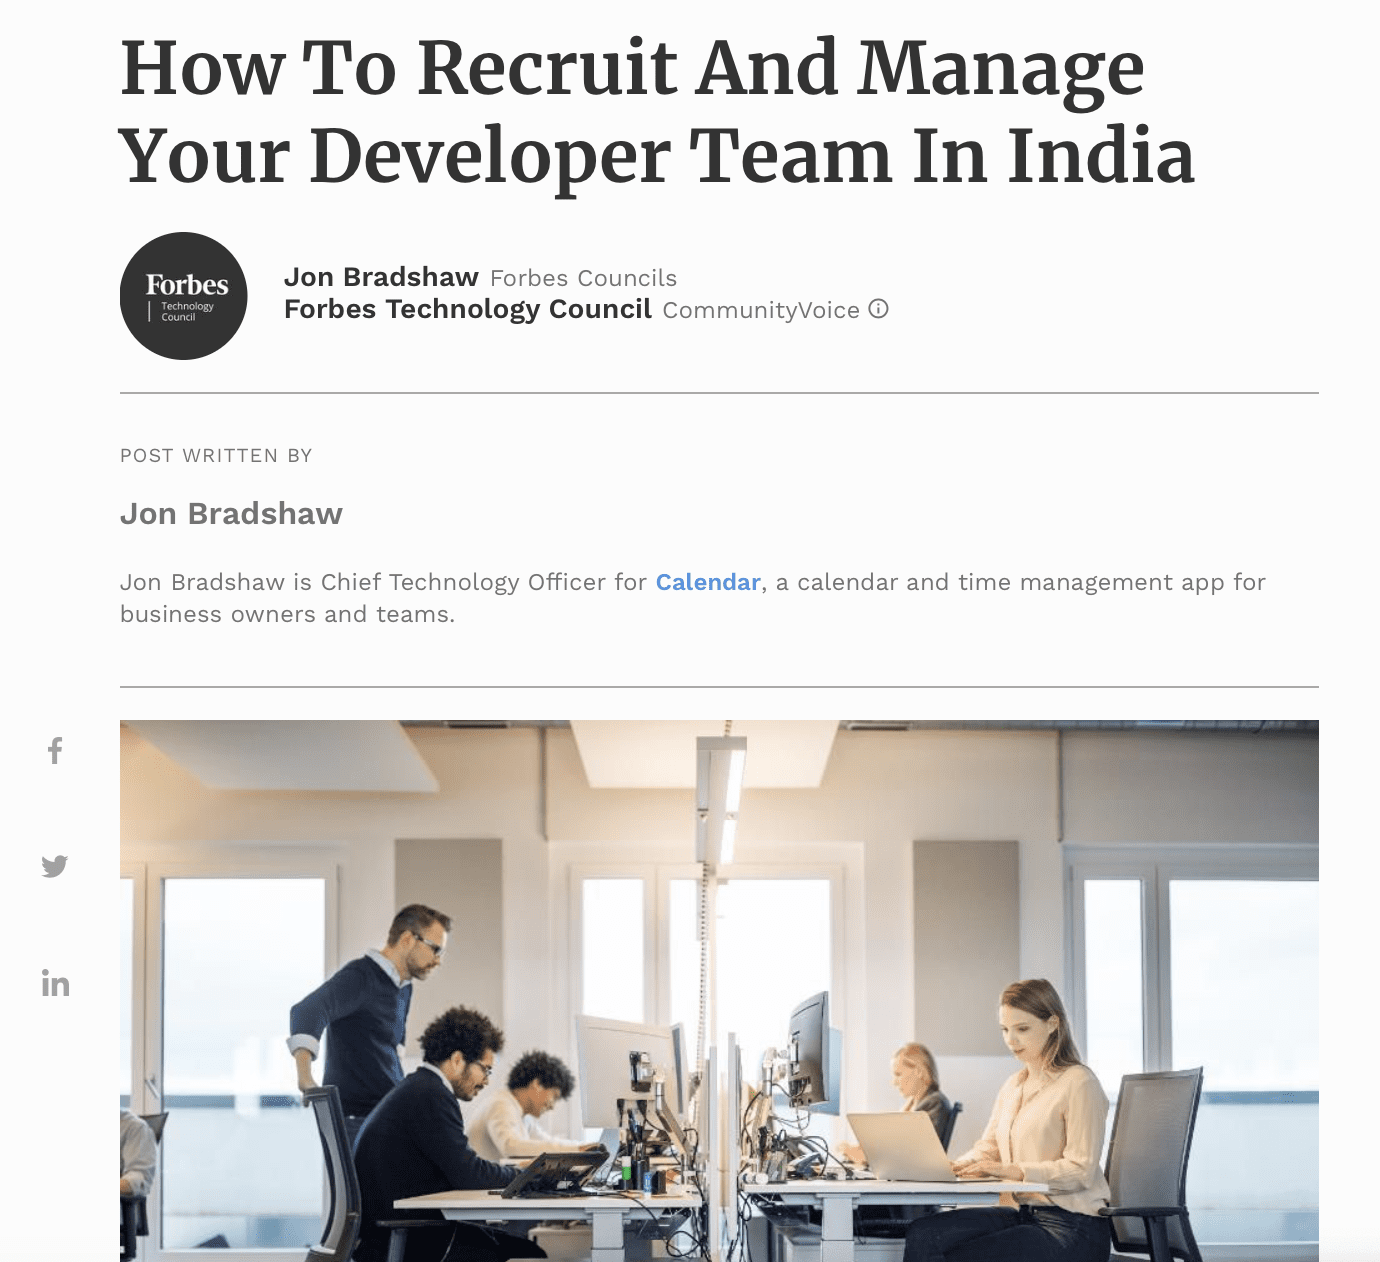 Recruiting developers in India